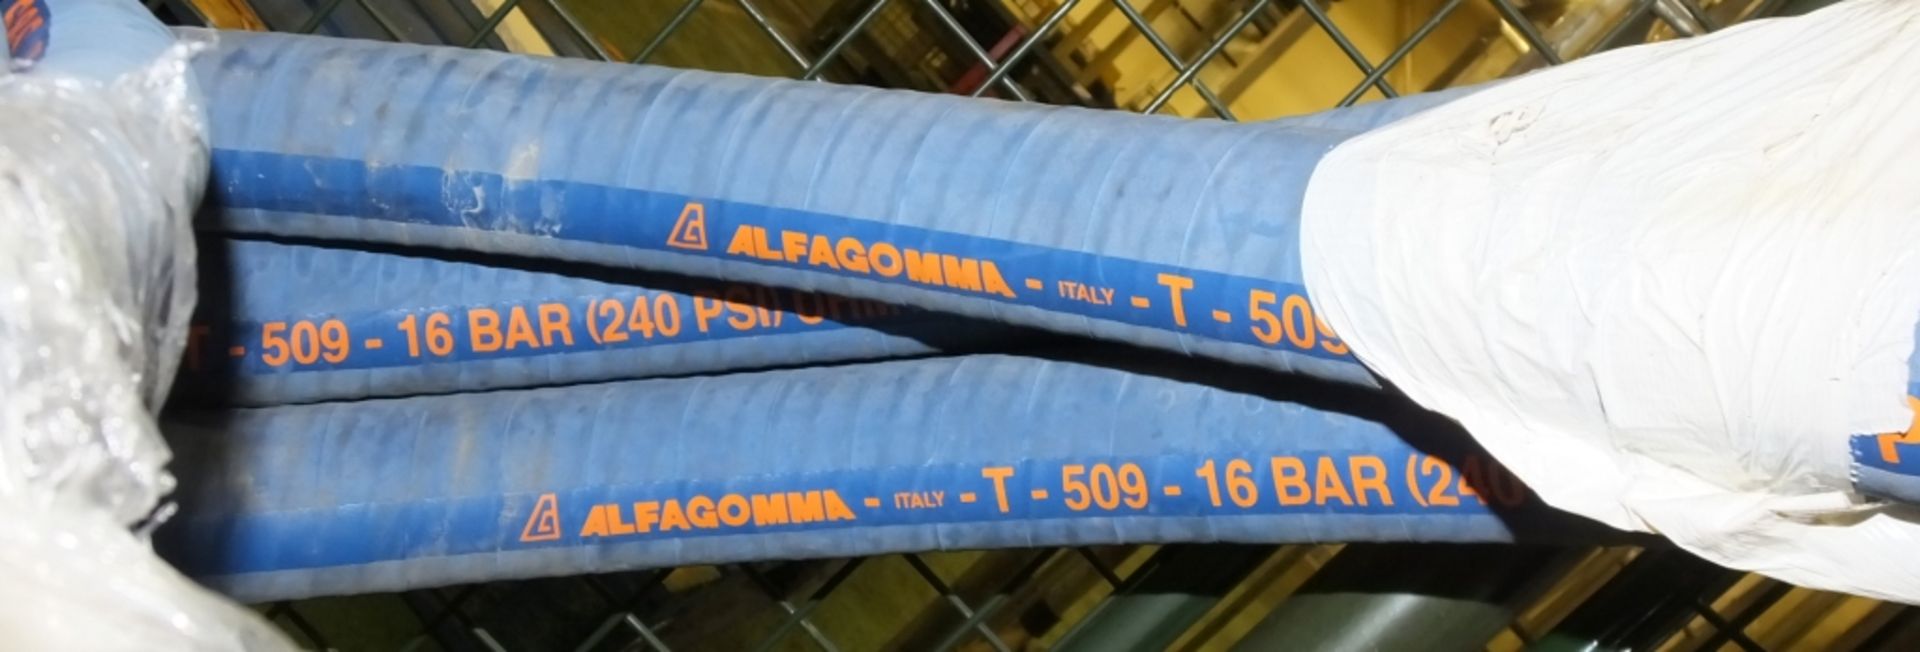 4x Heavy Duty Hoses - including Alfagomma T-509 (240 PSI) chemical - Image 4 of 4